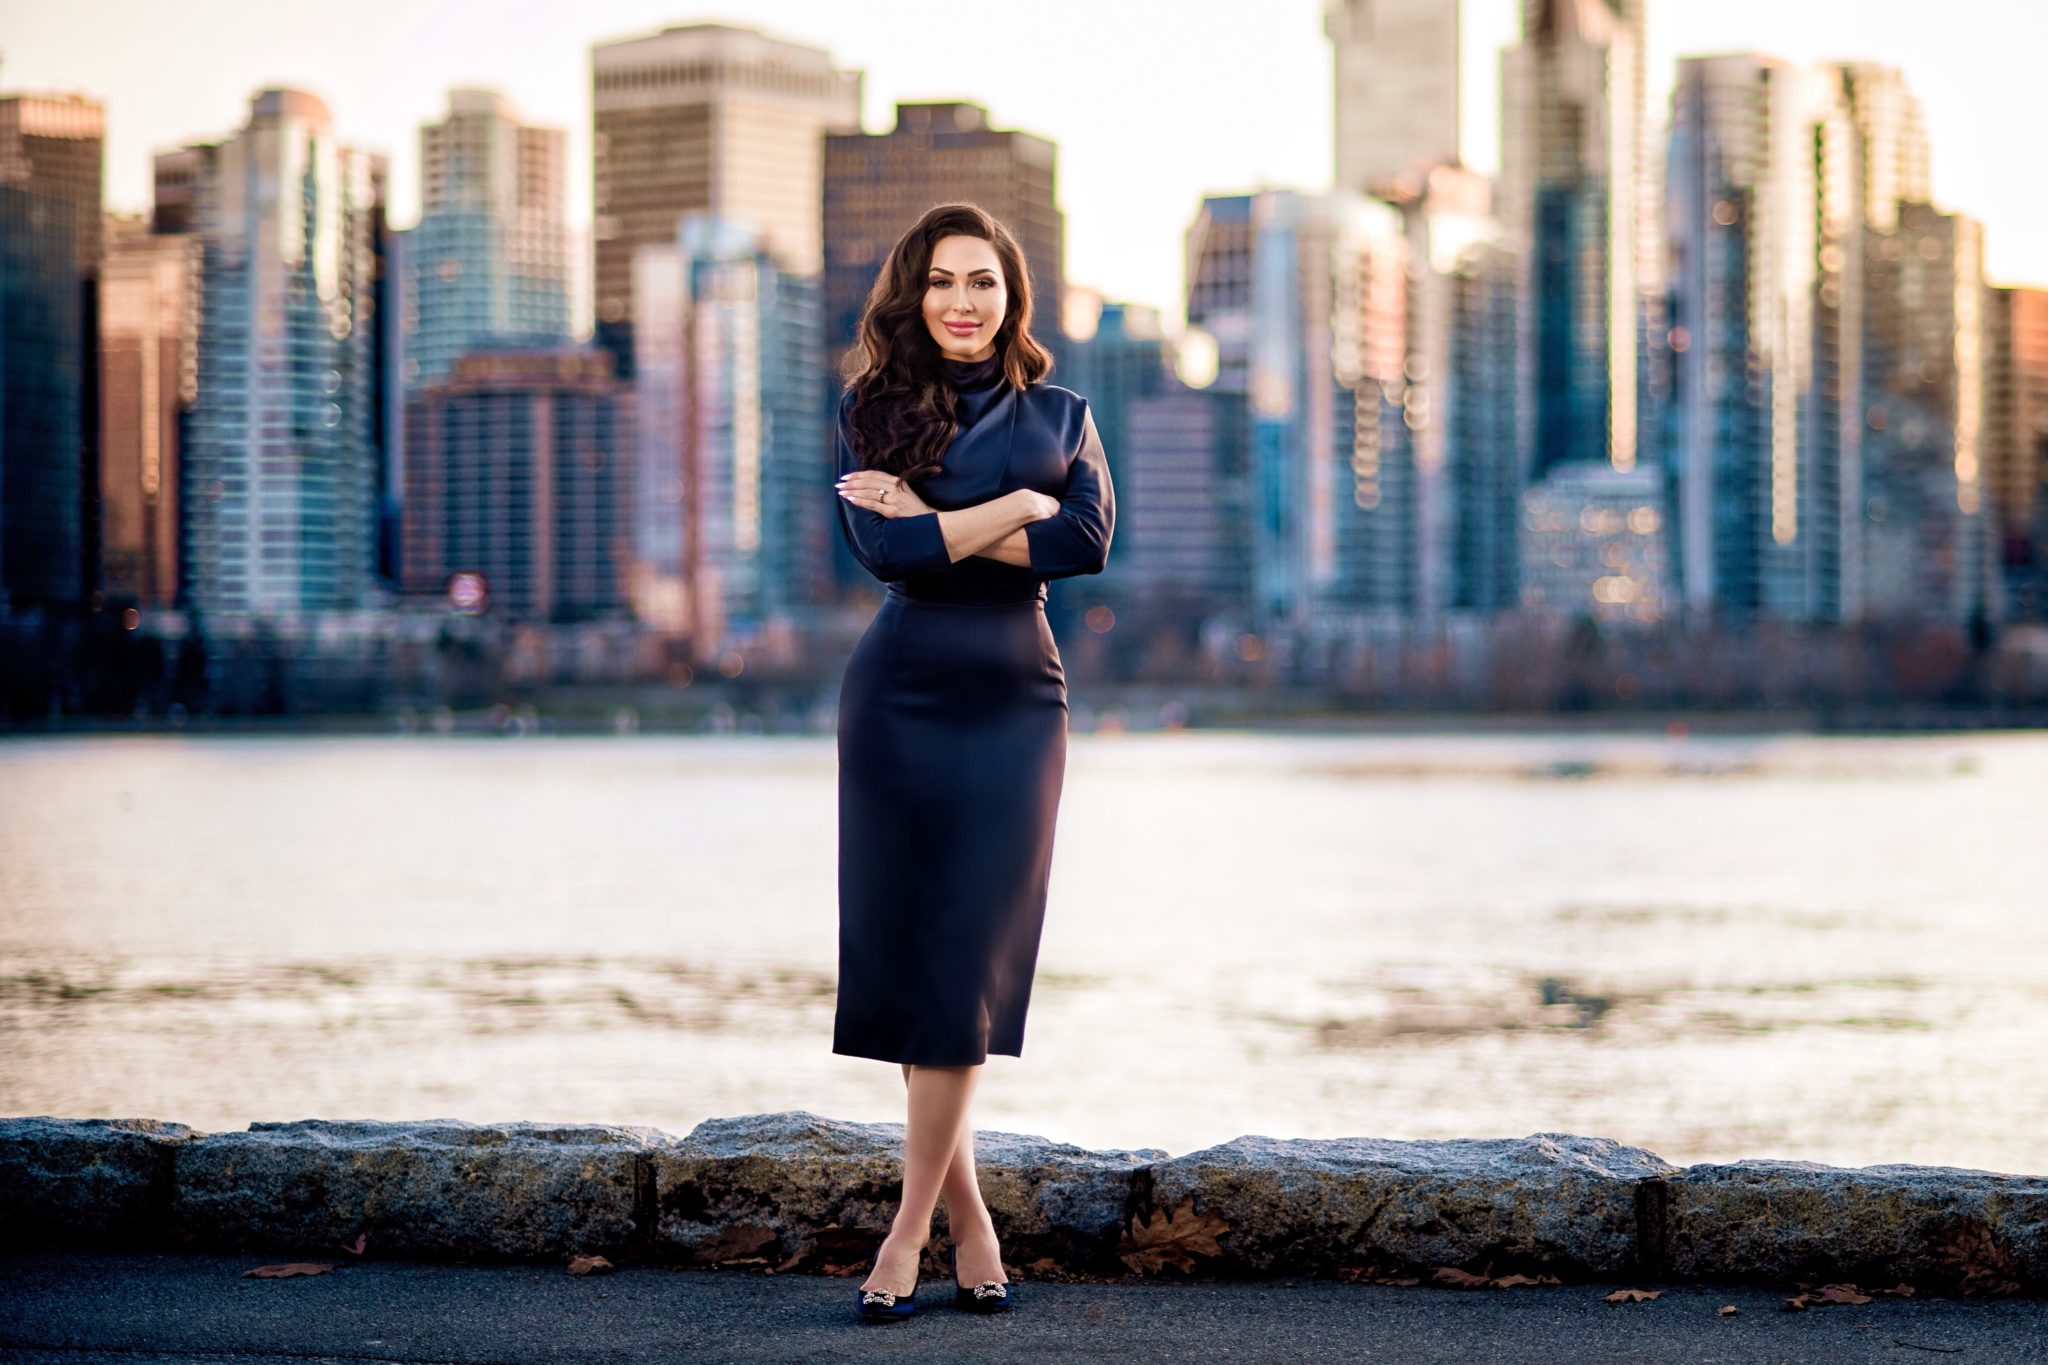 This Successful Entrepreneur Shares Her Top 5 Investing Tips For Women